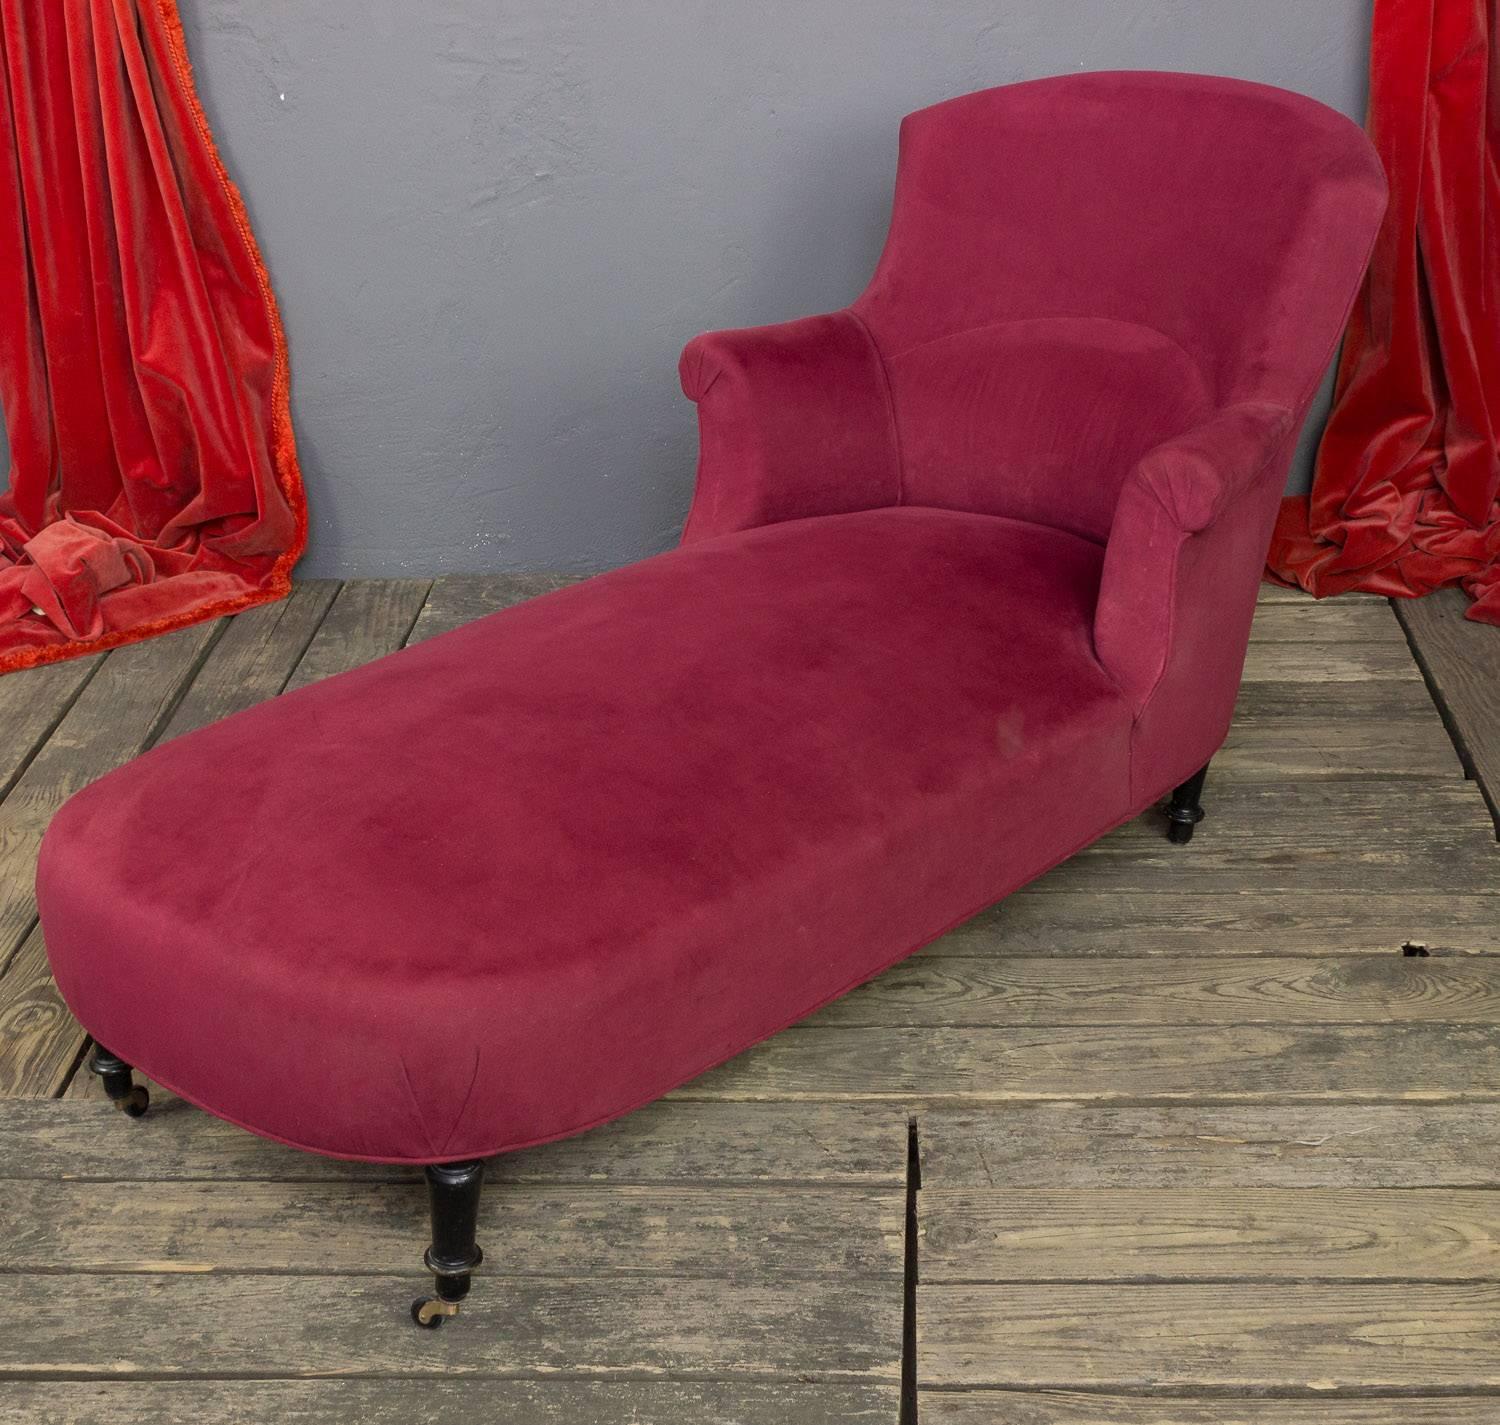 French 19th century Napoleon III chaise longue in vintage red velvet. Sold as is.
 